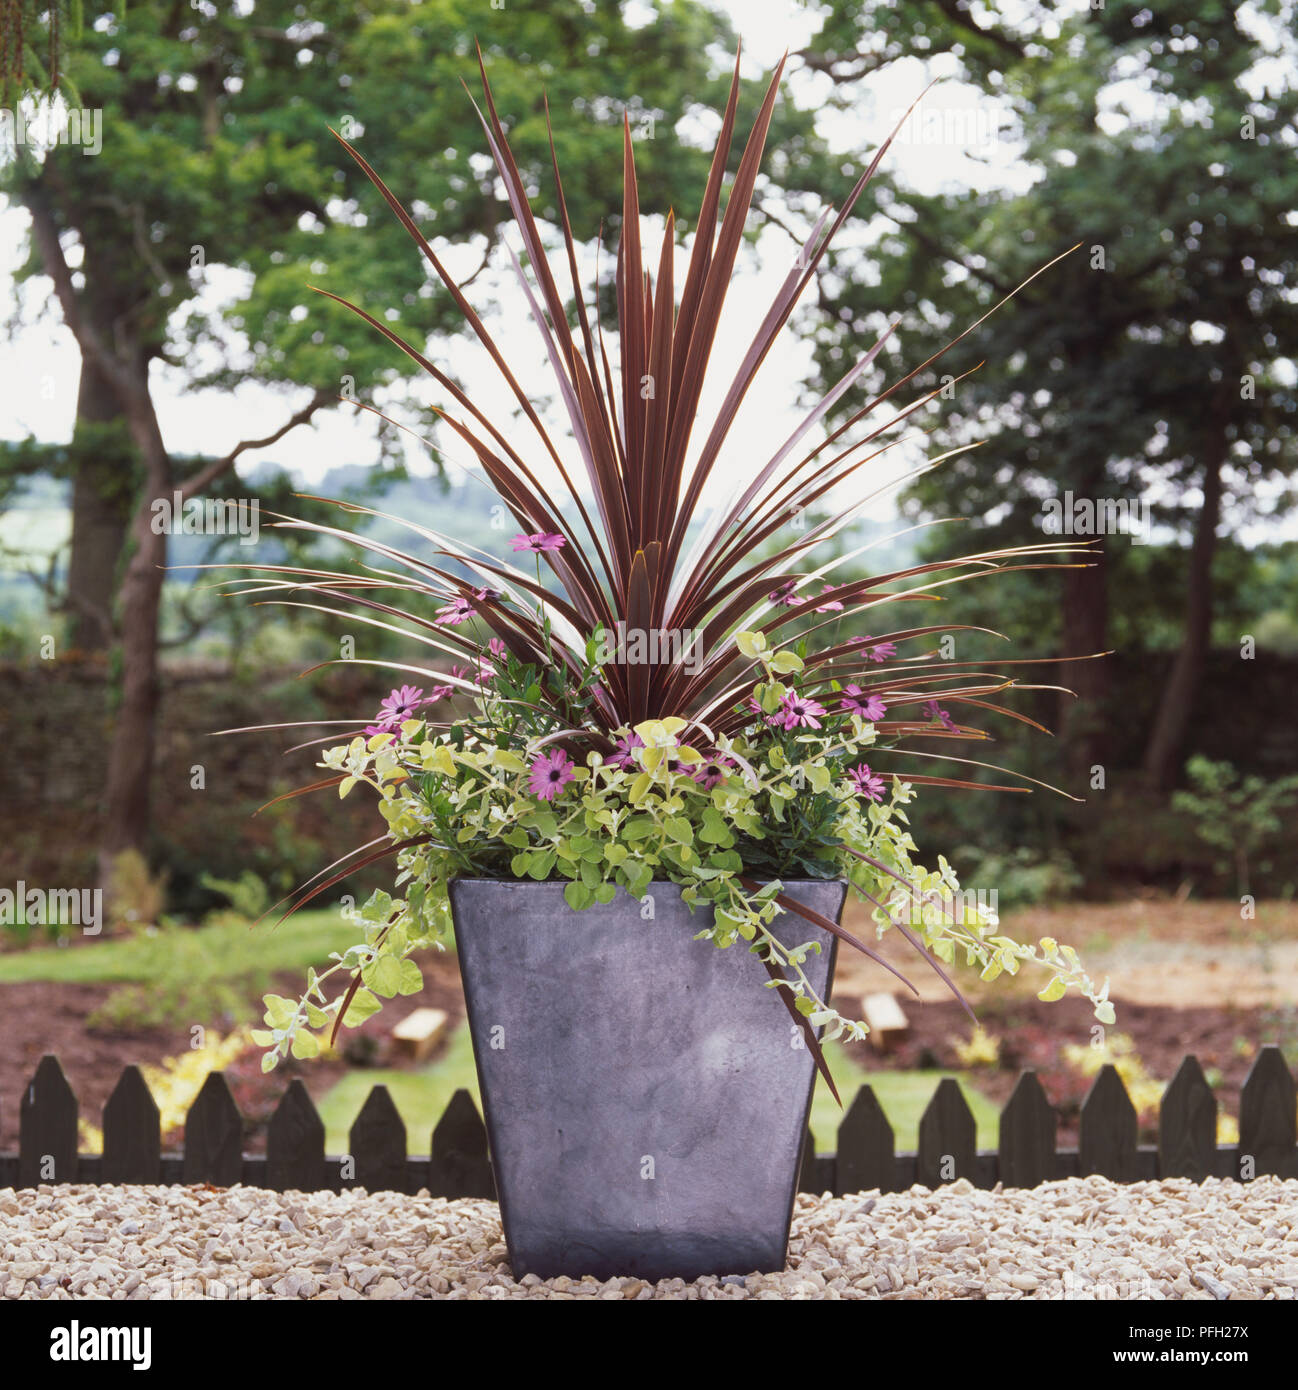 Cordyline australis 'Torbay Red', Osteospermums jucundum, Helichrysums petiolare 'Limelight', in a ceramic grey square container. Stock Photo